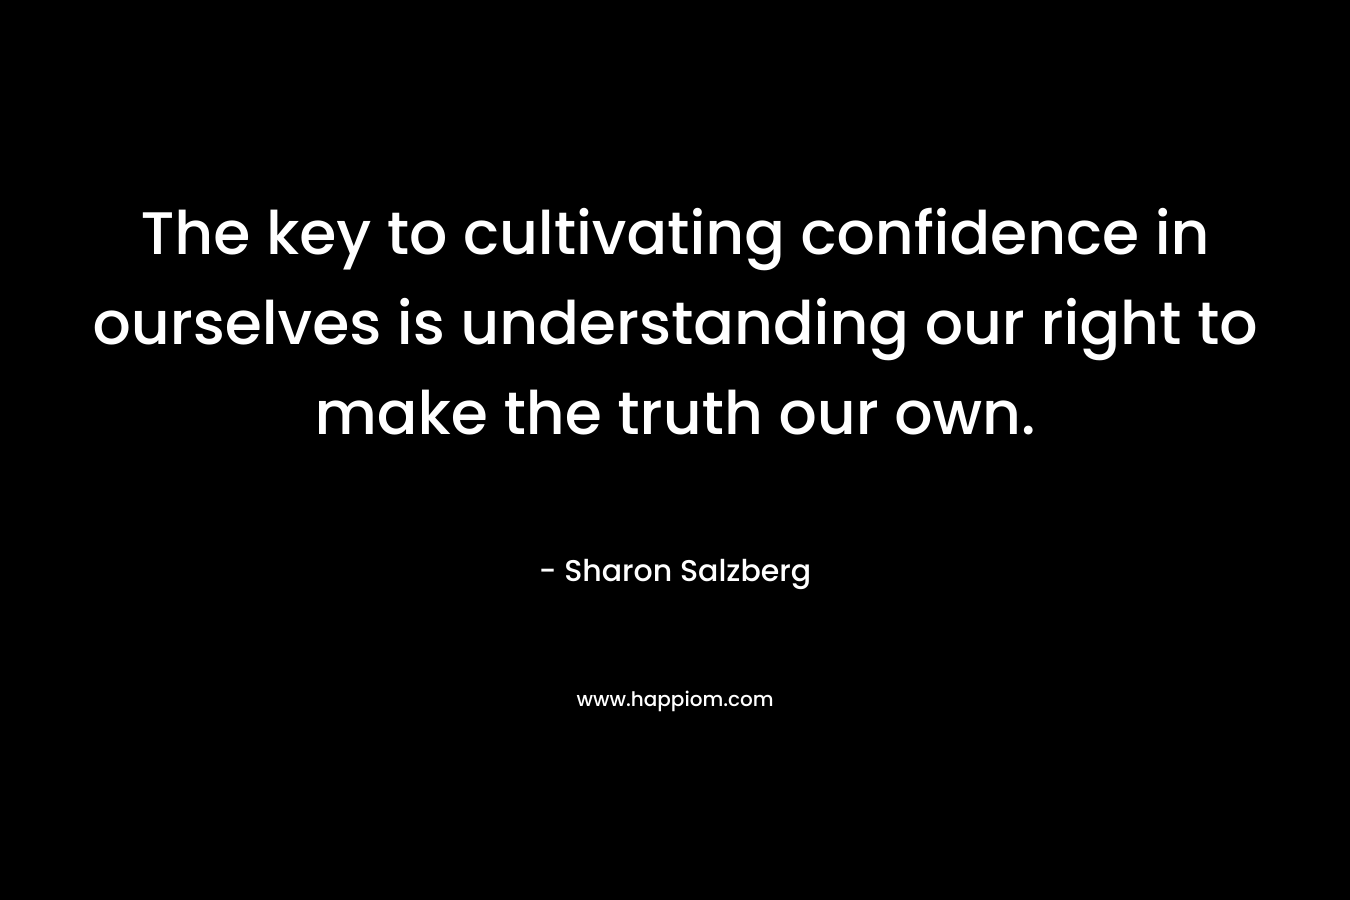 The key to cultivating confidence in ourselves is understanding our right to make the truth our own. – Sharon Salzberg